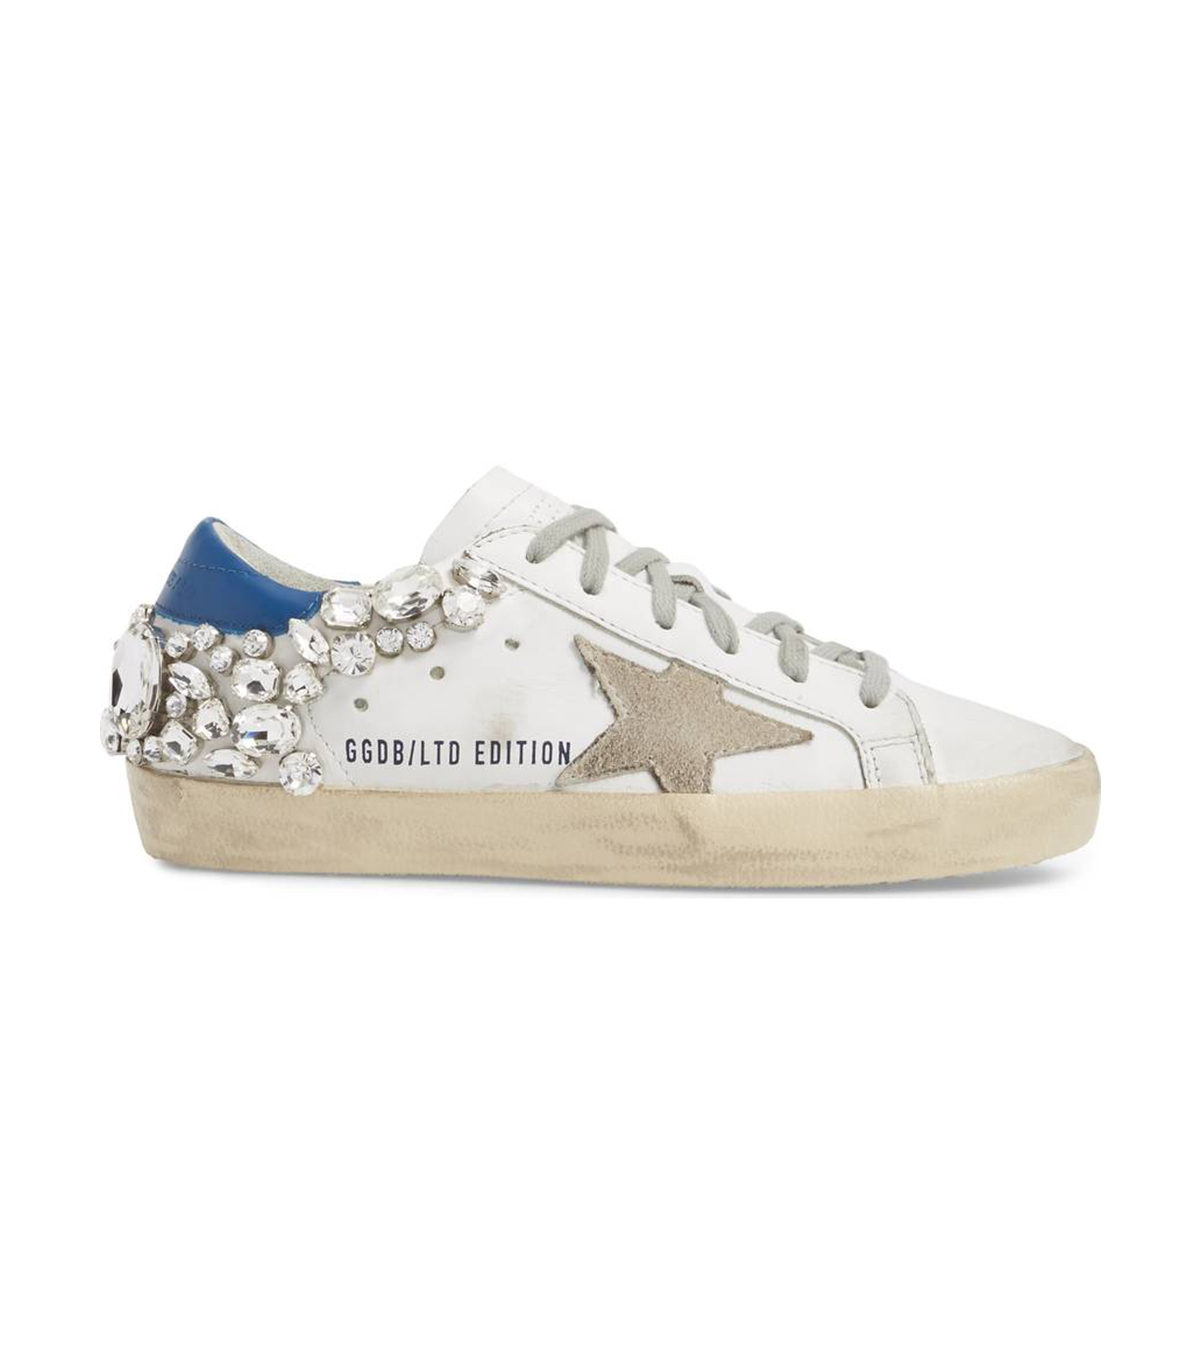 Shop Our Favorite Embellished Sneakers | Who What Wear